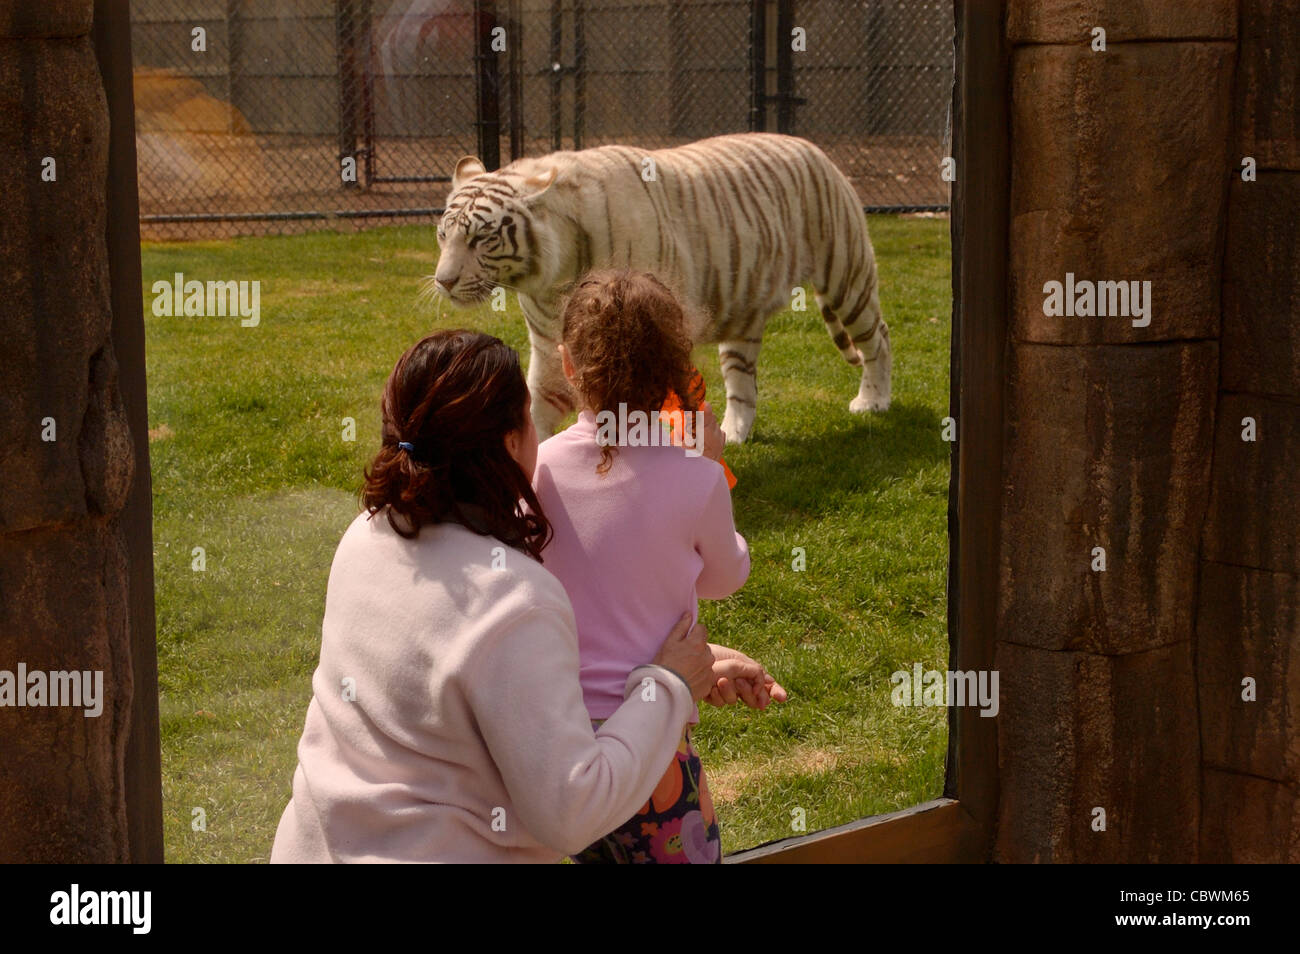 Mother and little girl watching a tiger at the zoo through protective ...